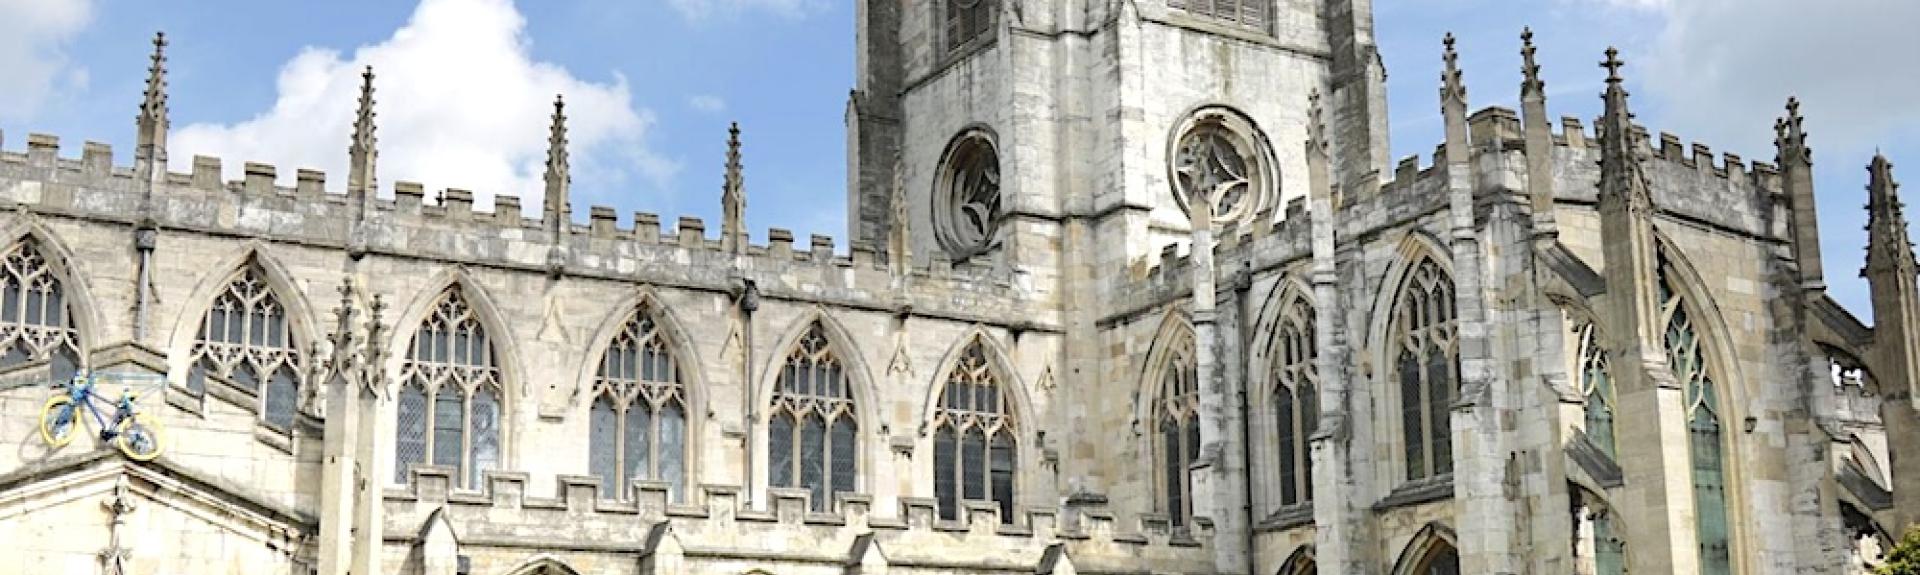 The exterior of a grand Gothic-syle cathedral in Beverley.